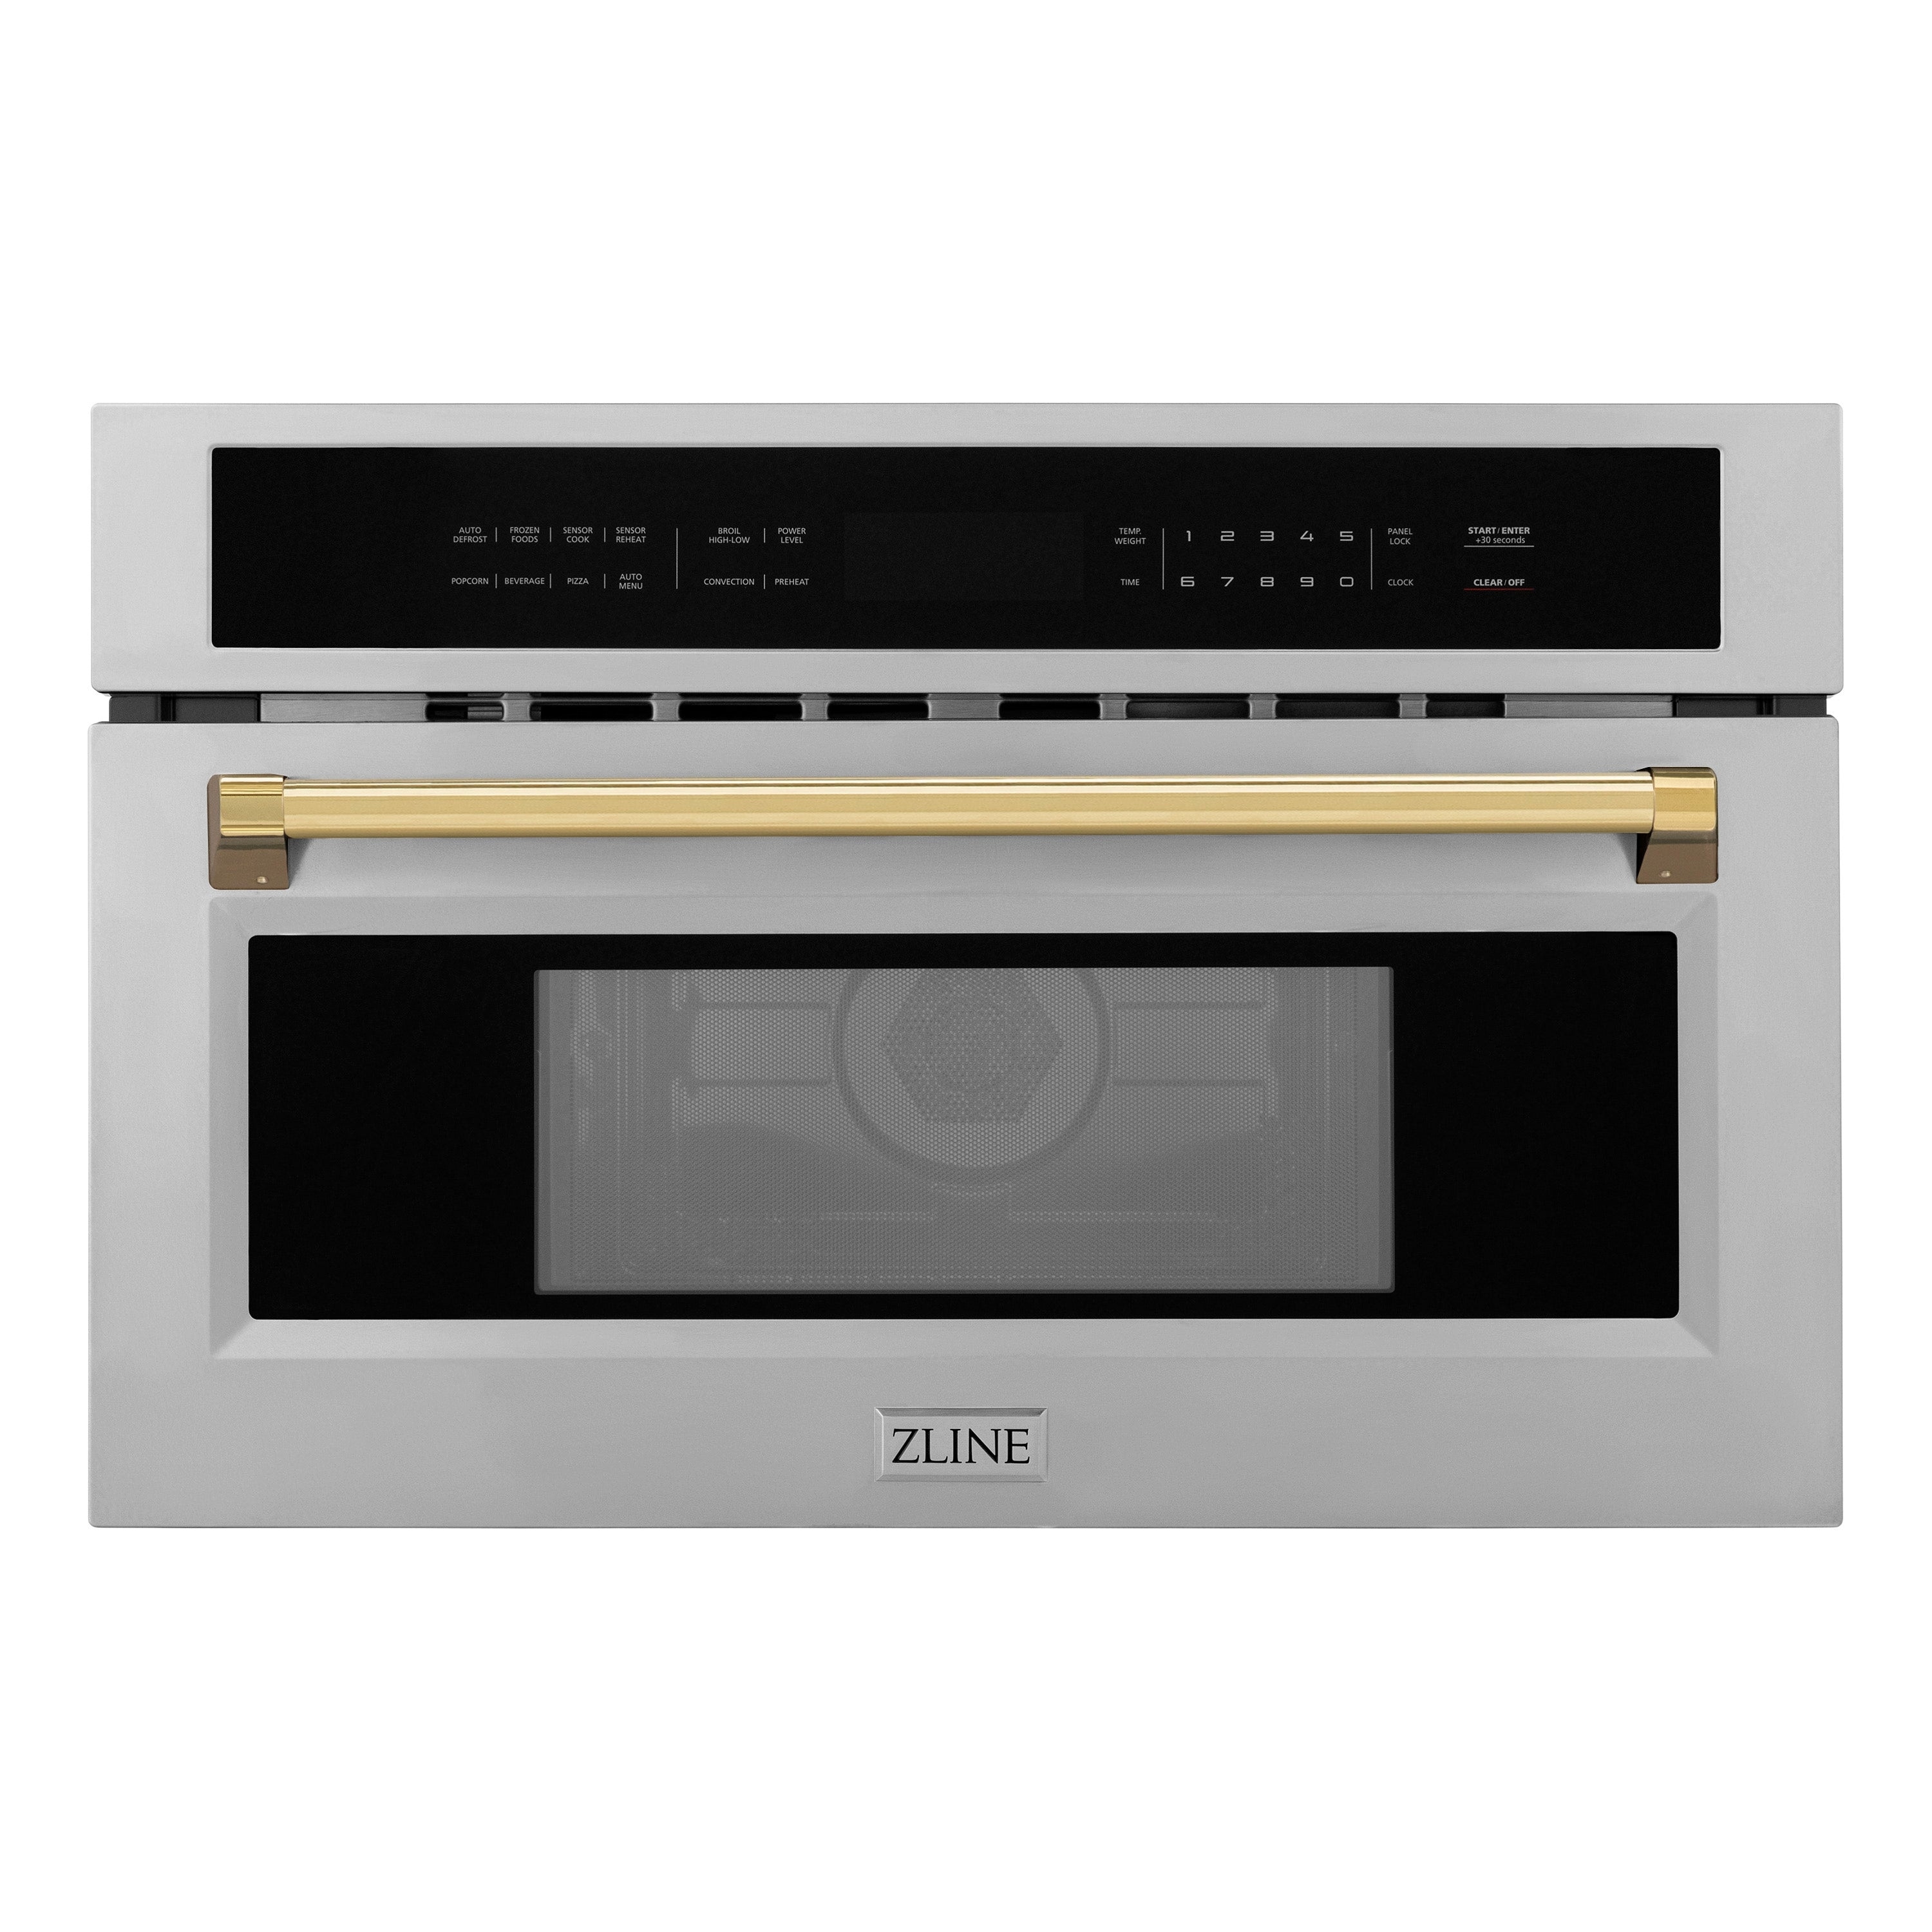 Zline Kitchen and Bath ZLINE Autograph Edition 30" 1.6 cu ft. Built-in Convection Microwave Oven in Stainless Steel and Gold Accents